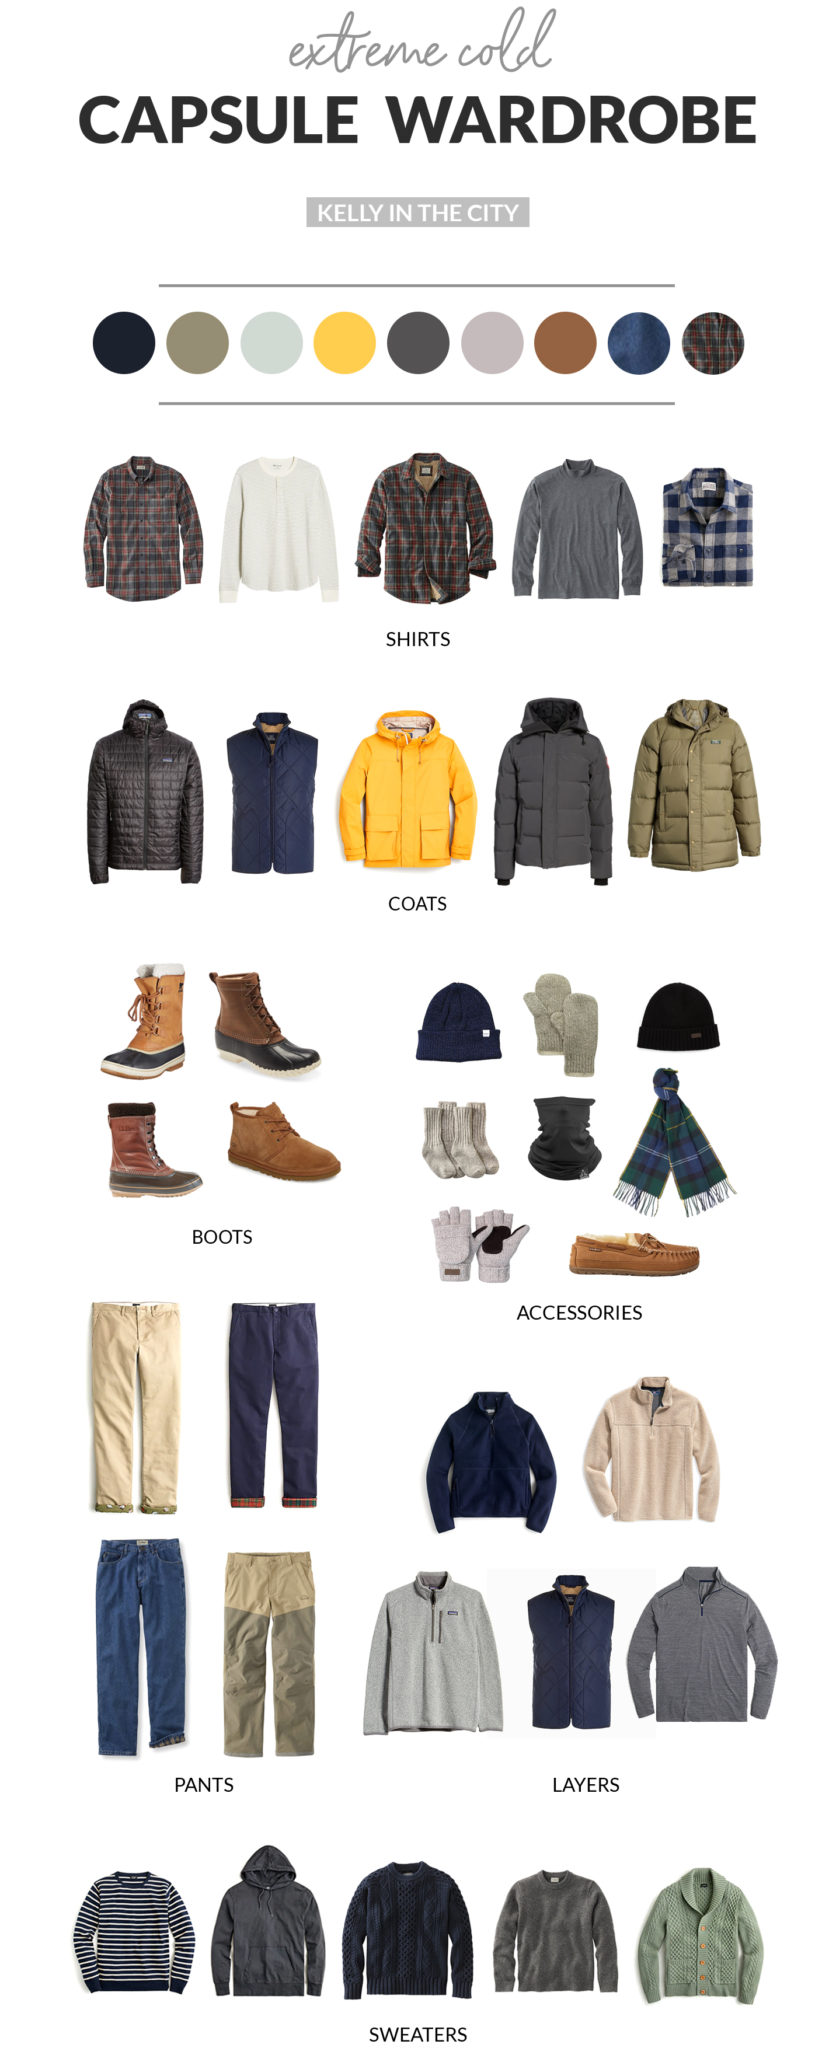 Men's Extreme Cold Capsule Wardrobe | Kelly in the City